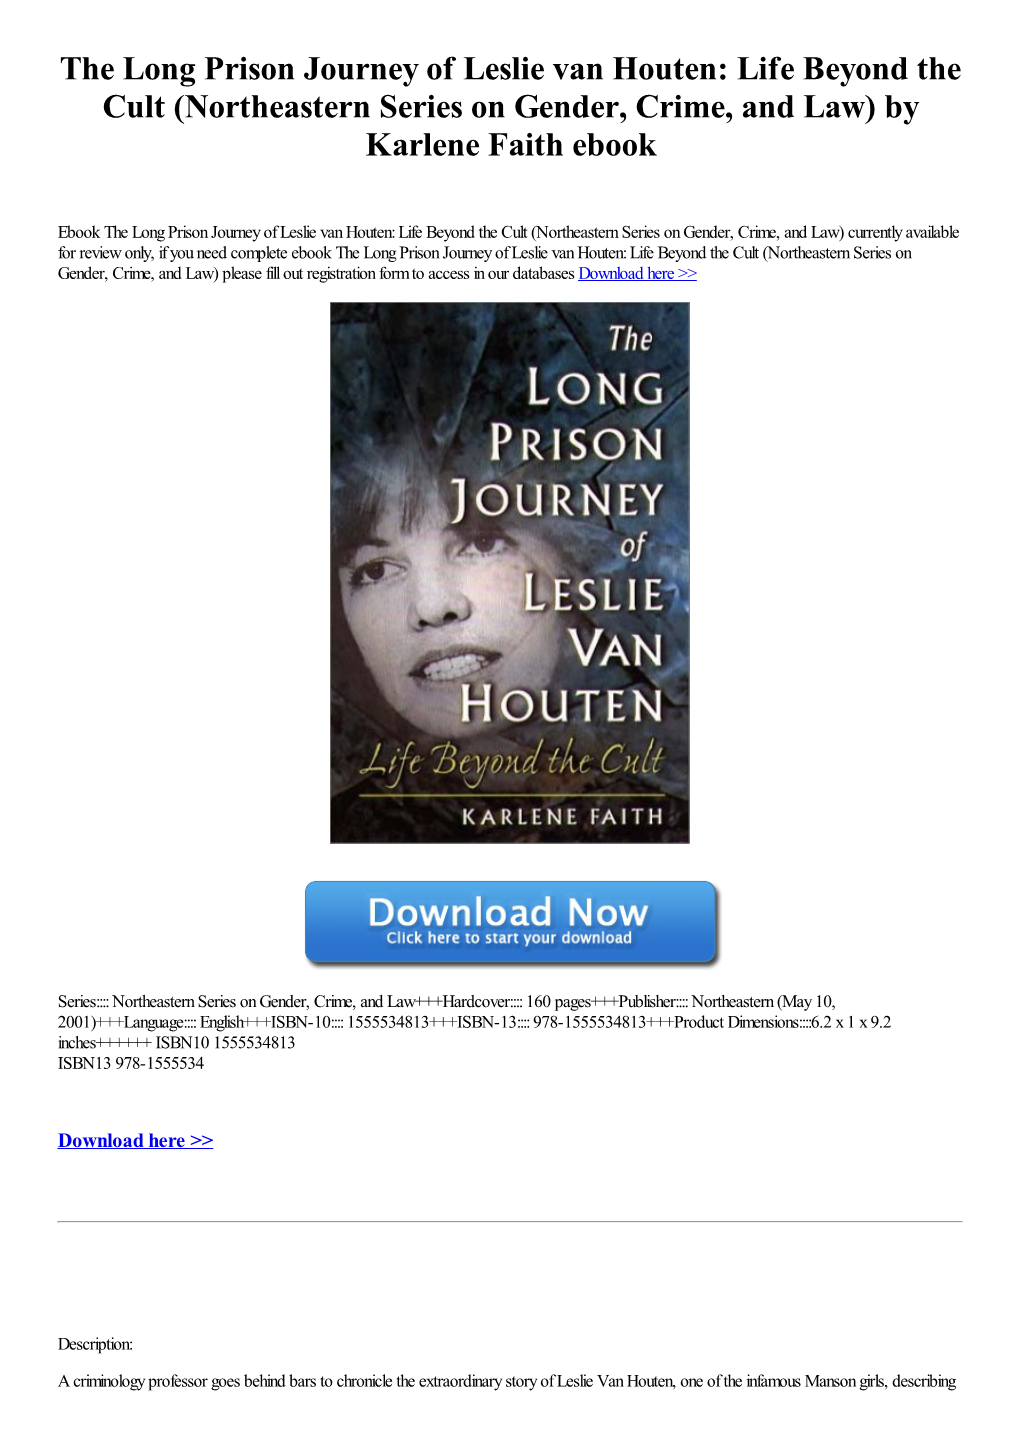 The Long Prison Journey of Leslie Van Houten: Life Beyond the Cult (Northeastern Series on Gender, Crime, and Law) by Karlene Faith Ebook